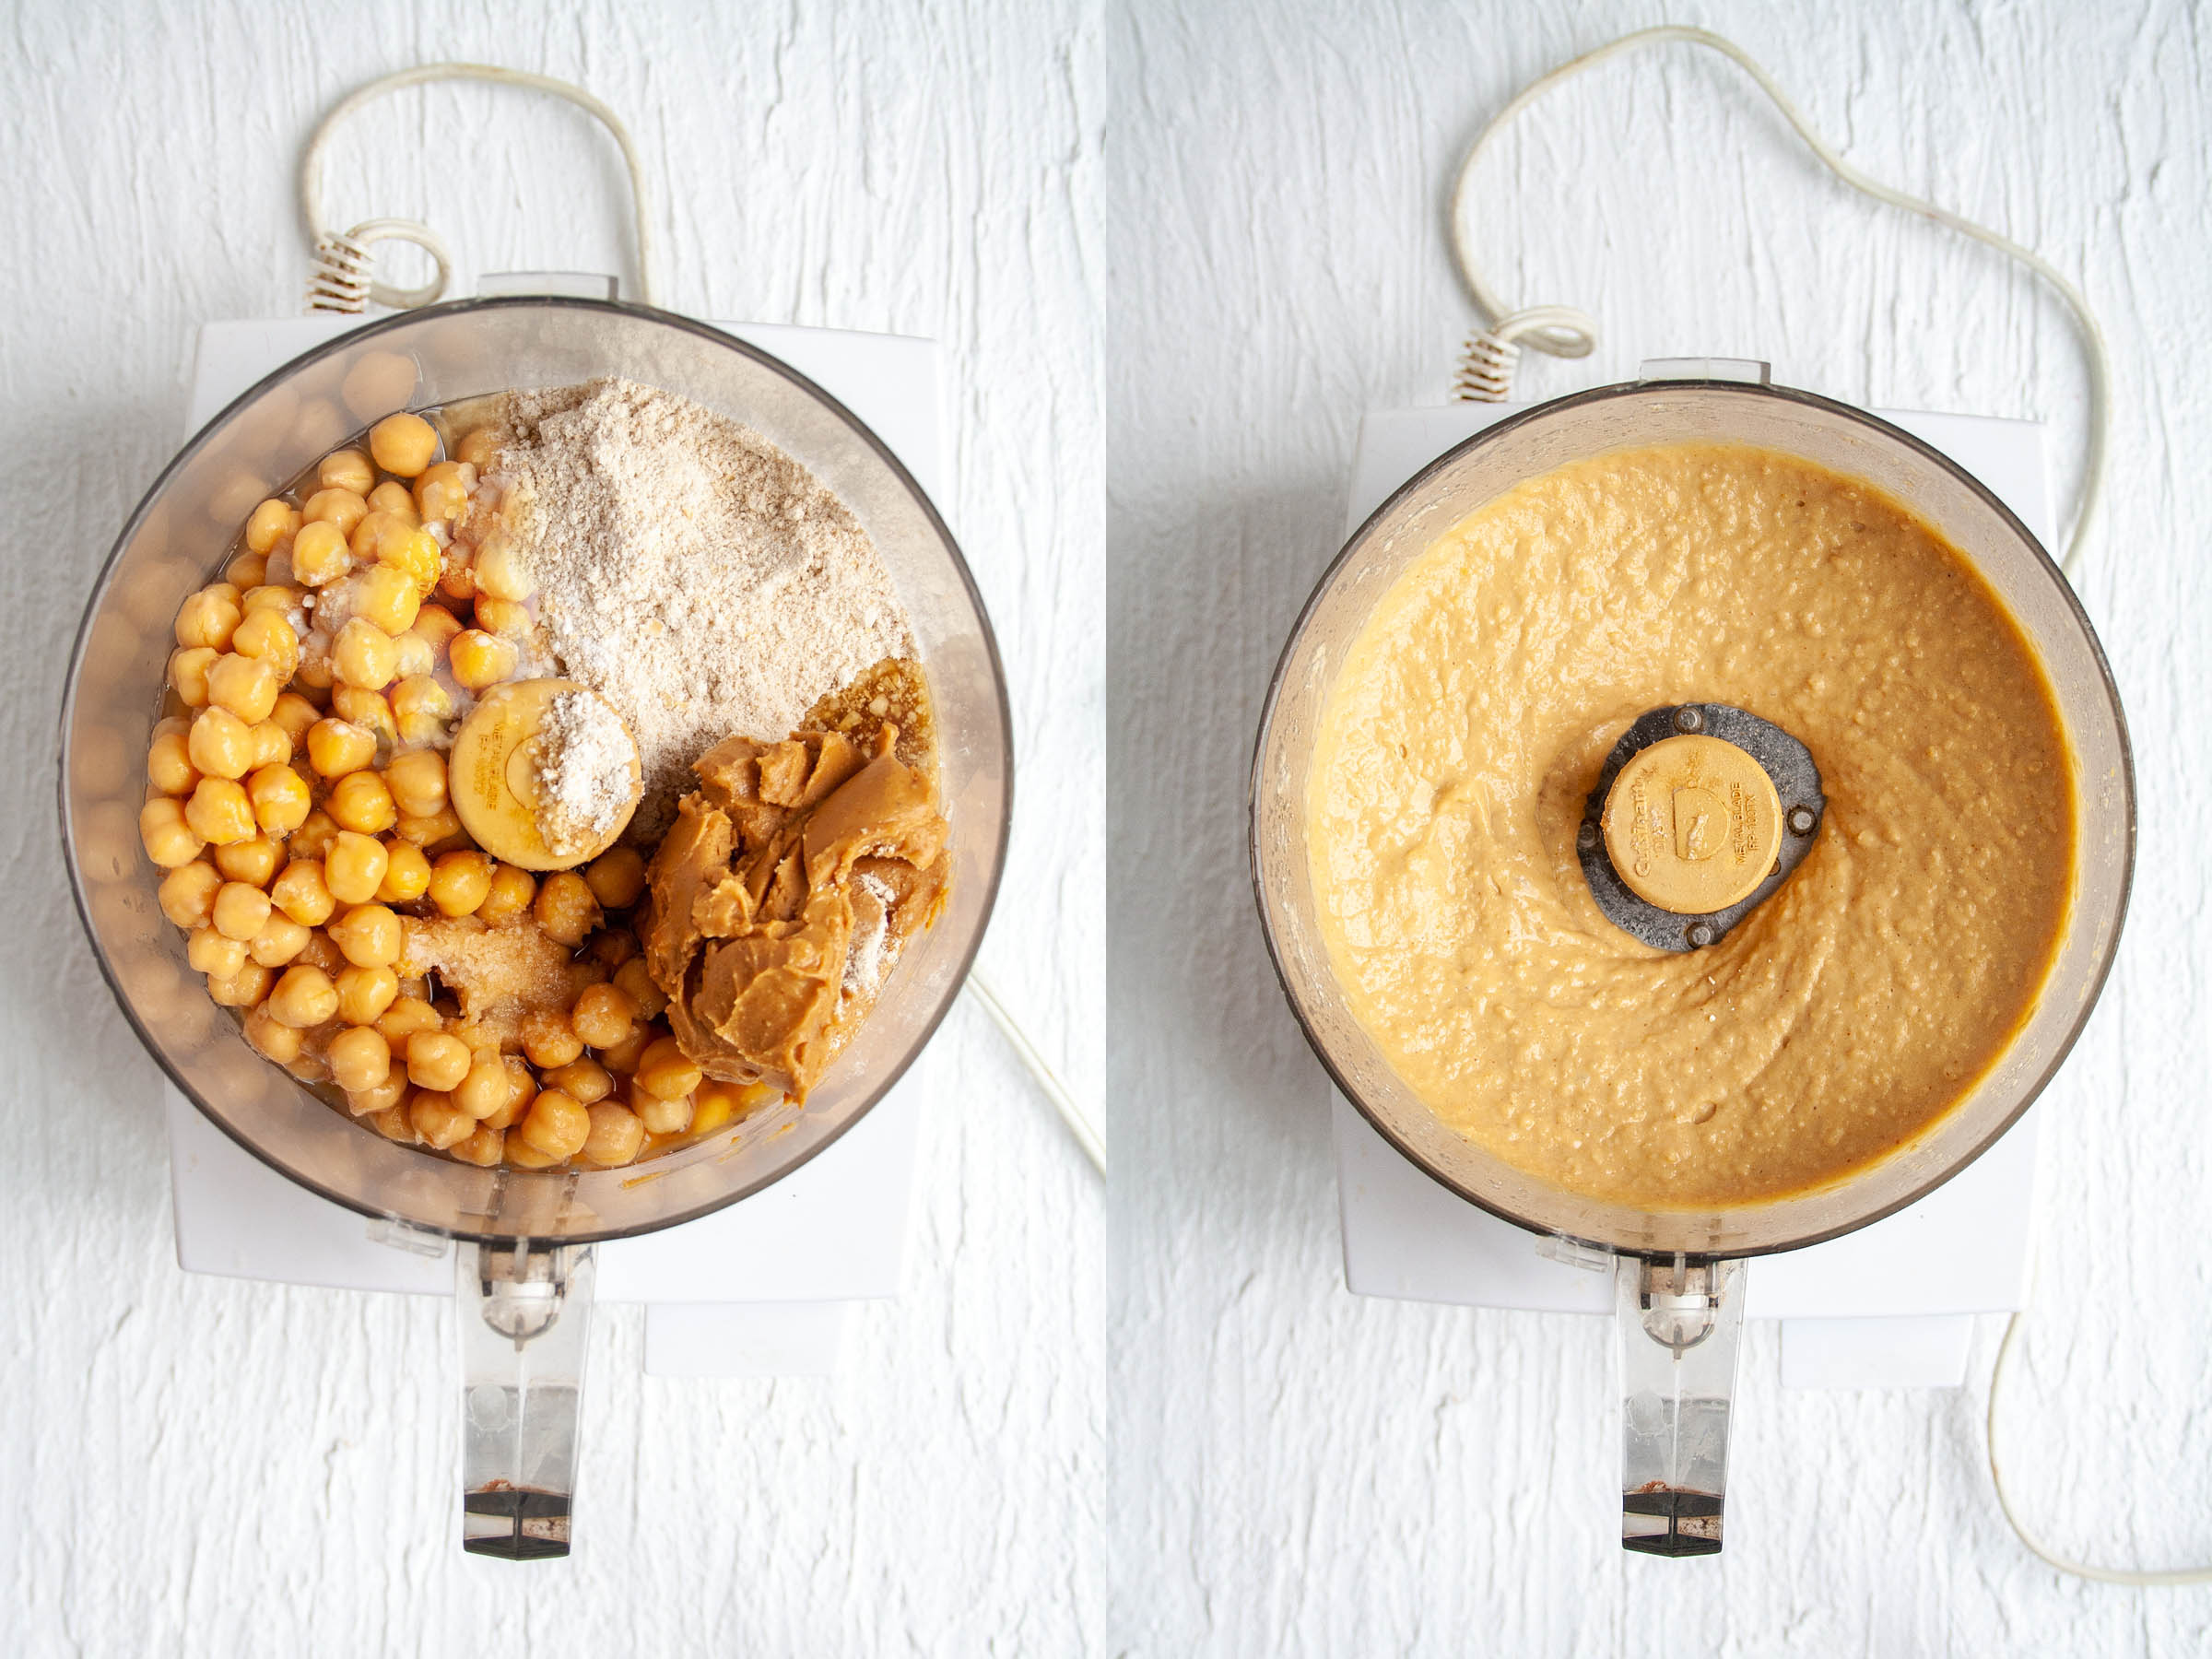 Chickpea Cookie Dough before and after mixing.